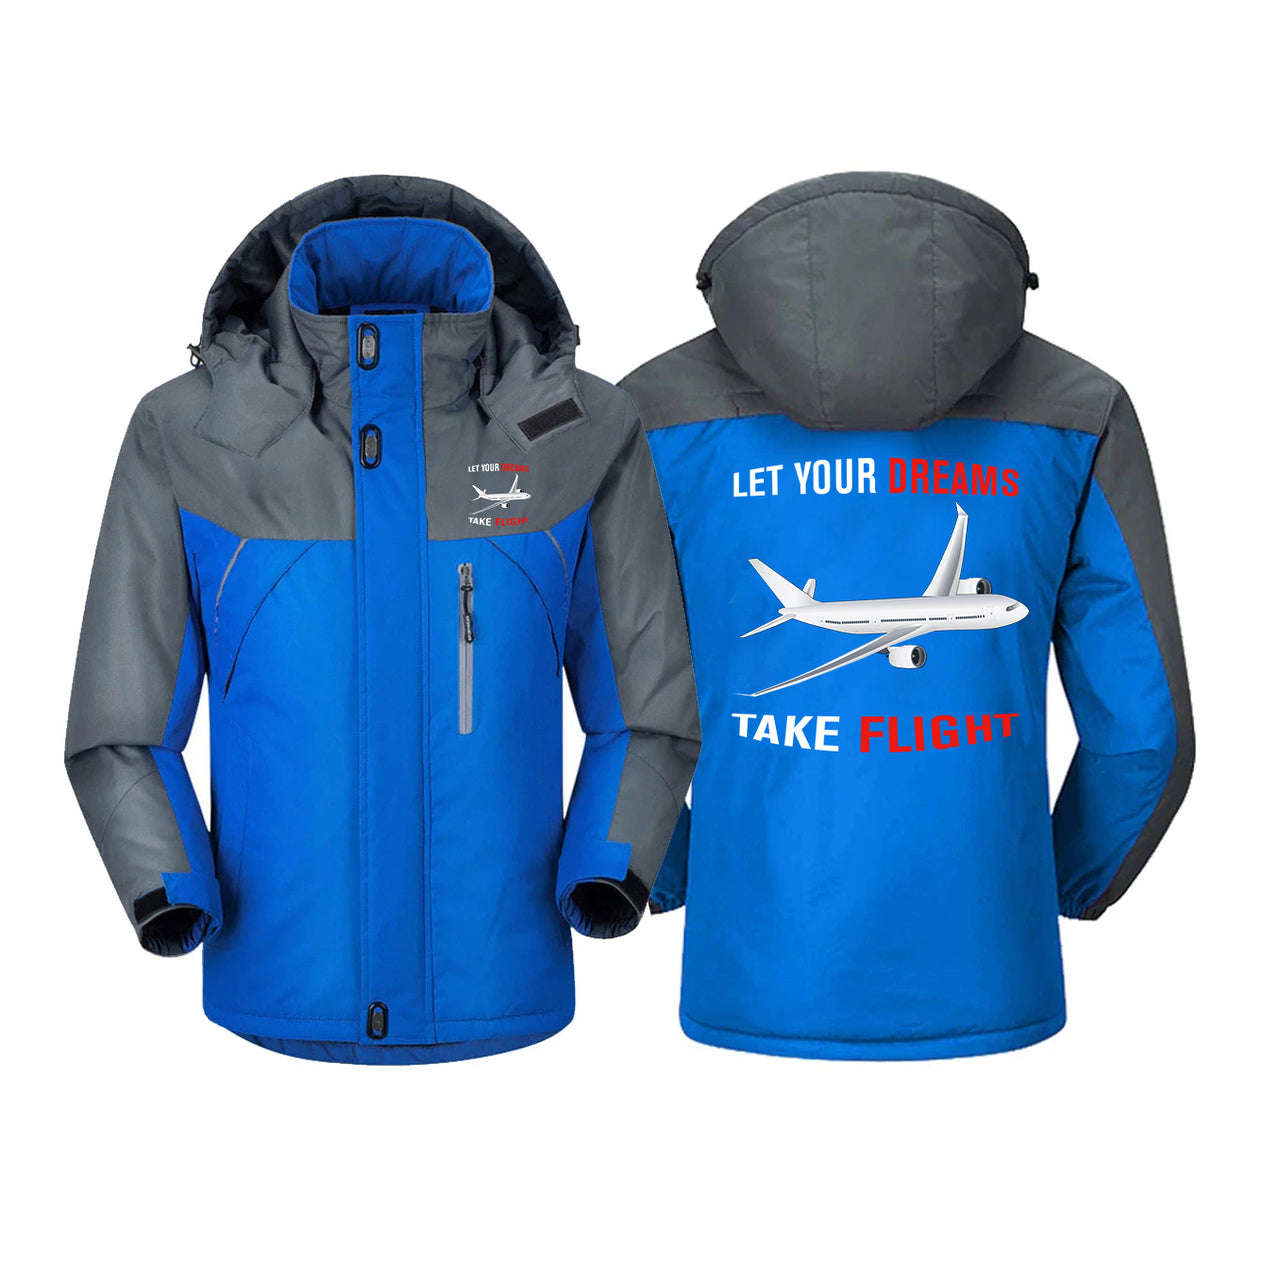 Let Your Dreams Take Flight Designed Thick Winter Jackets